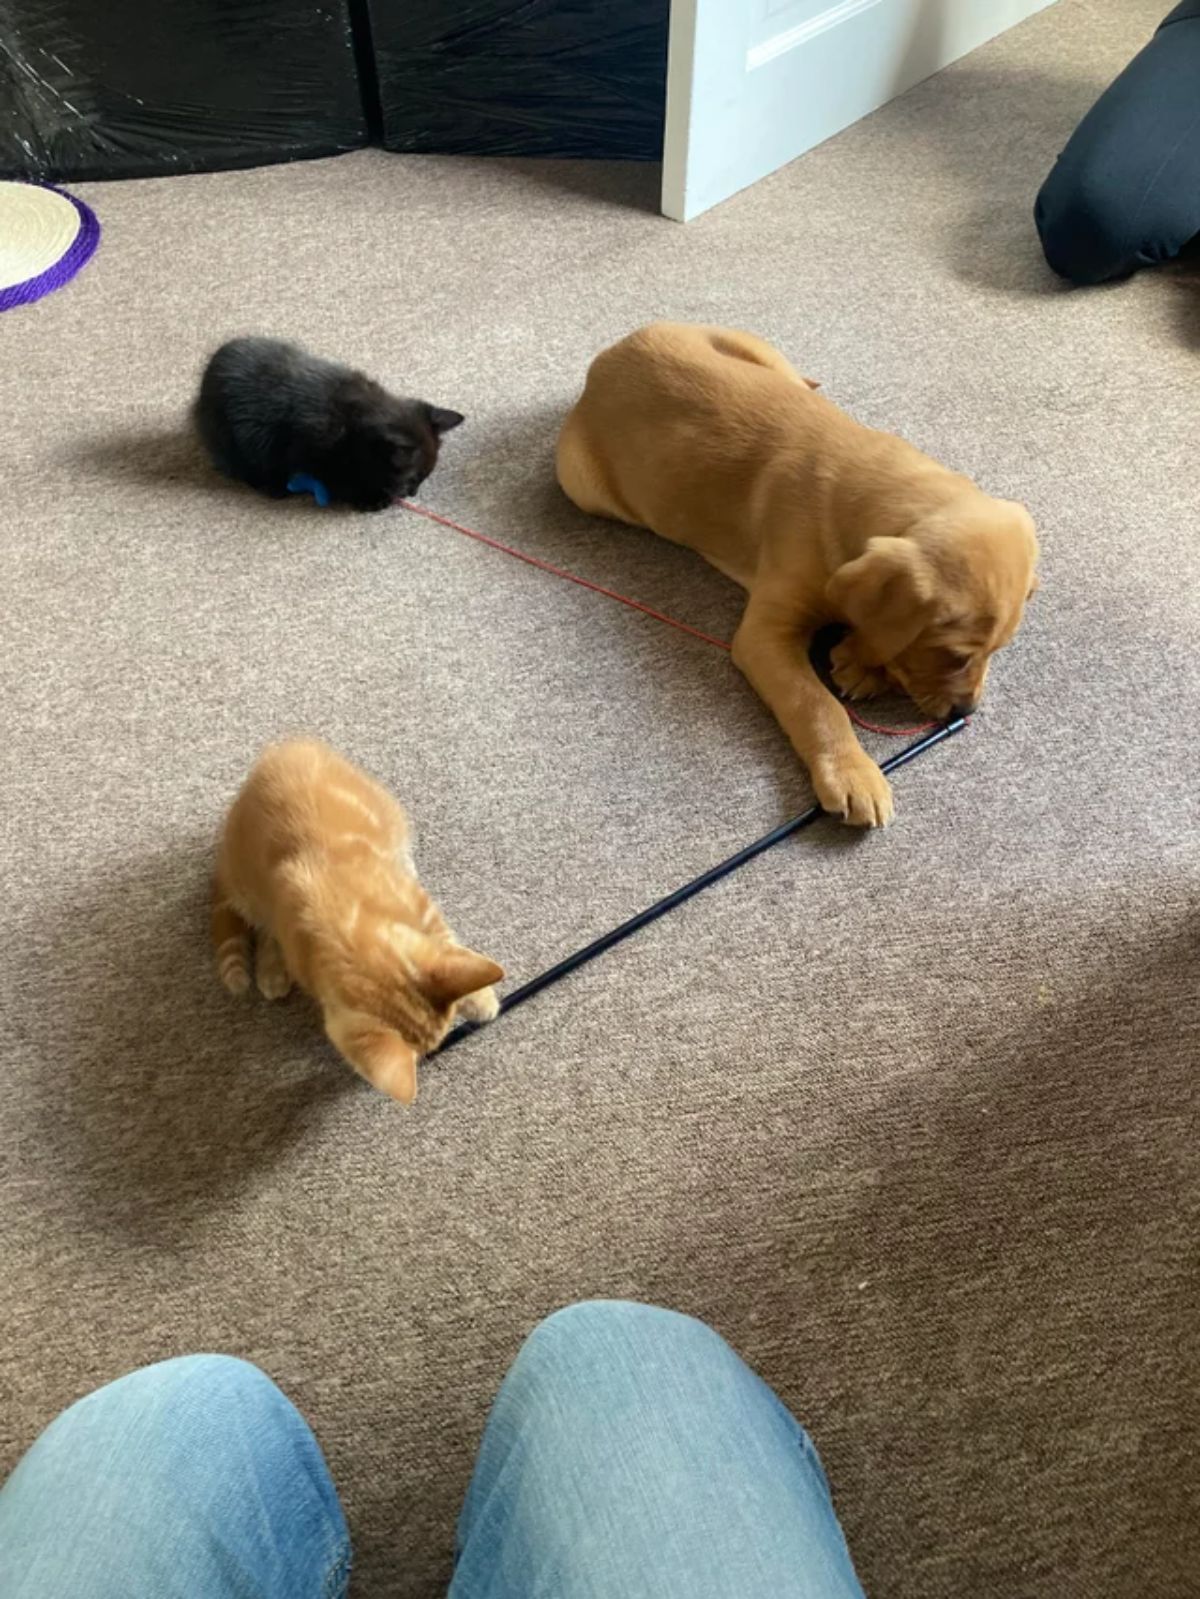 orange kitten, brown puppy and black kitten playing with a cat toy laid on the floor